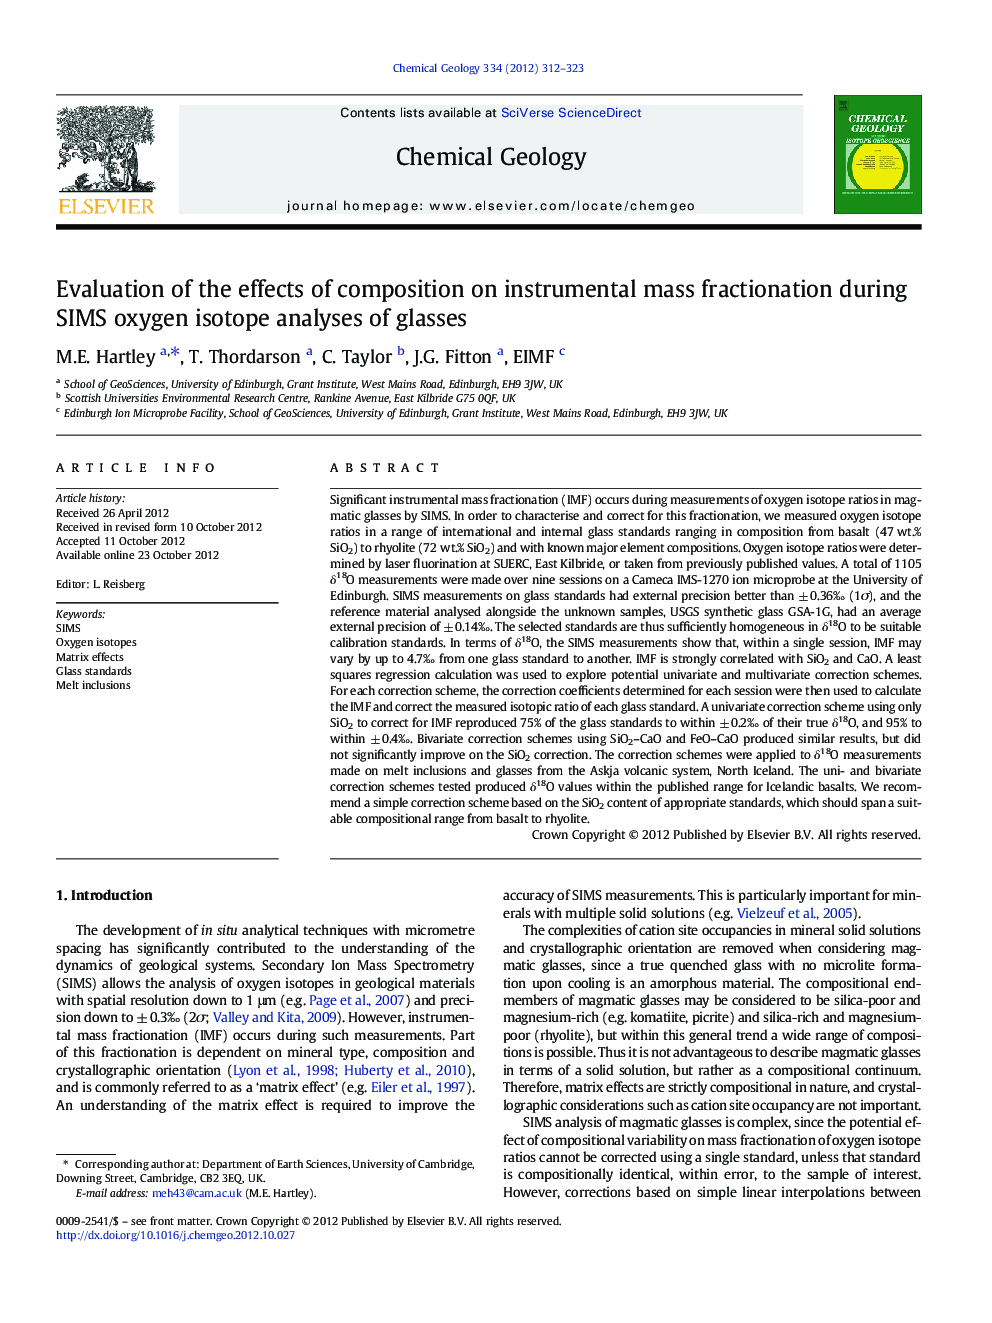 Evaluation of the effects of composition on instrumental mass fractionation during SIMS oxygen isotope analyses of glasses